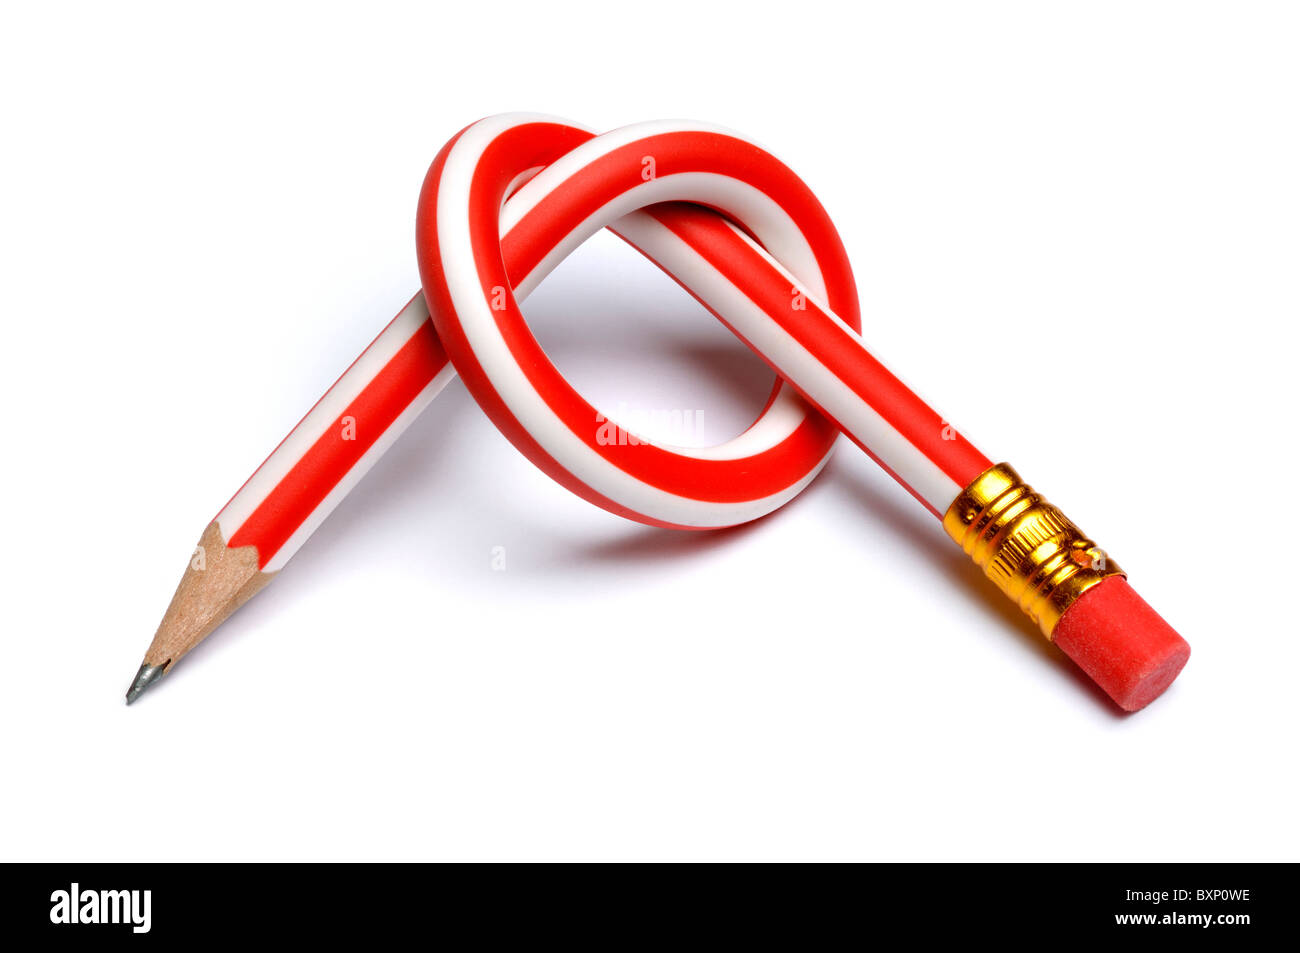 Pencil tied in a knot Stock Photo